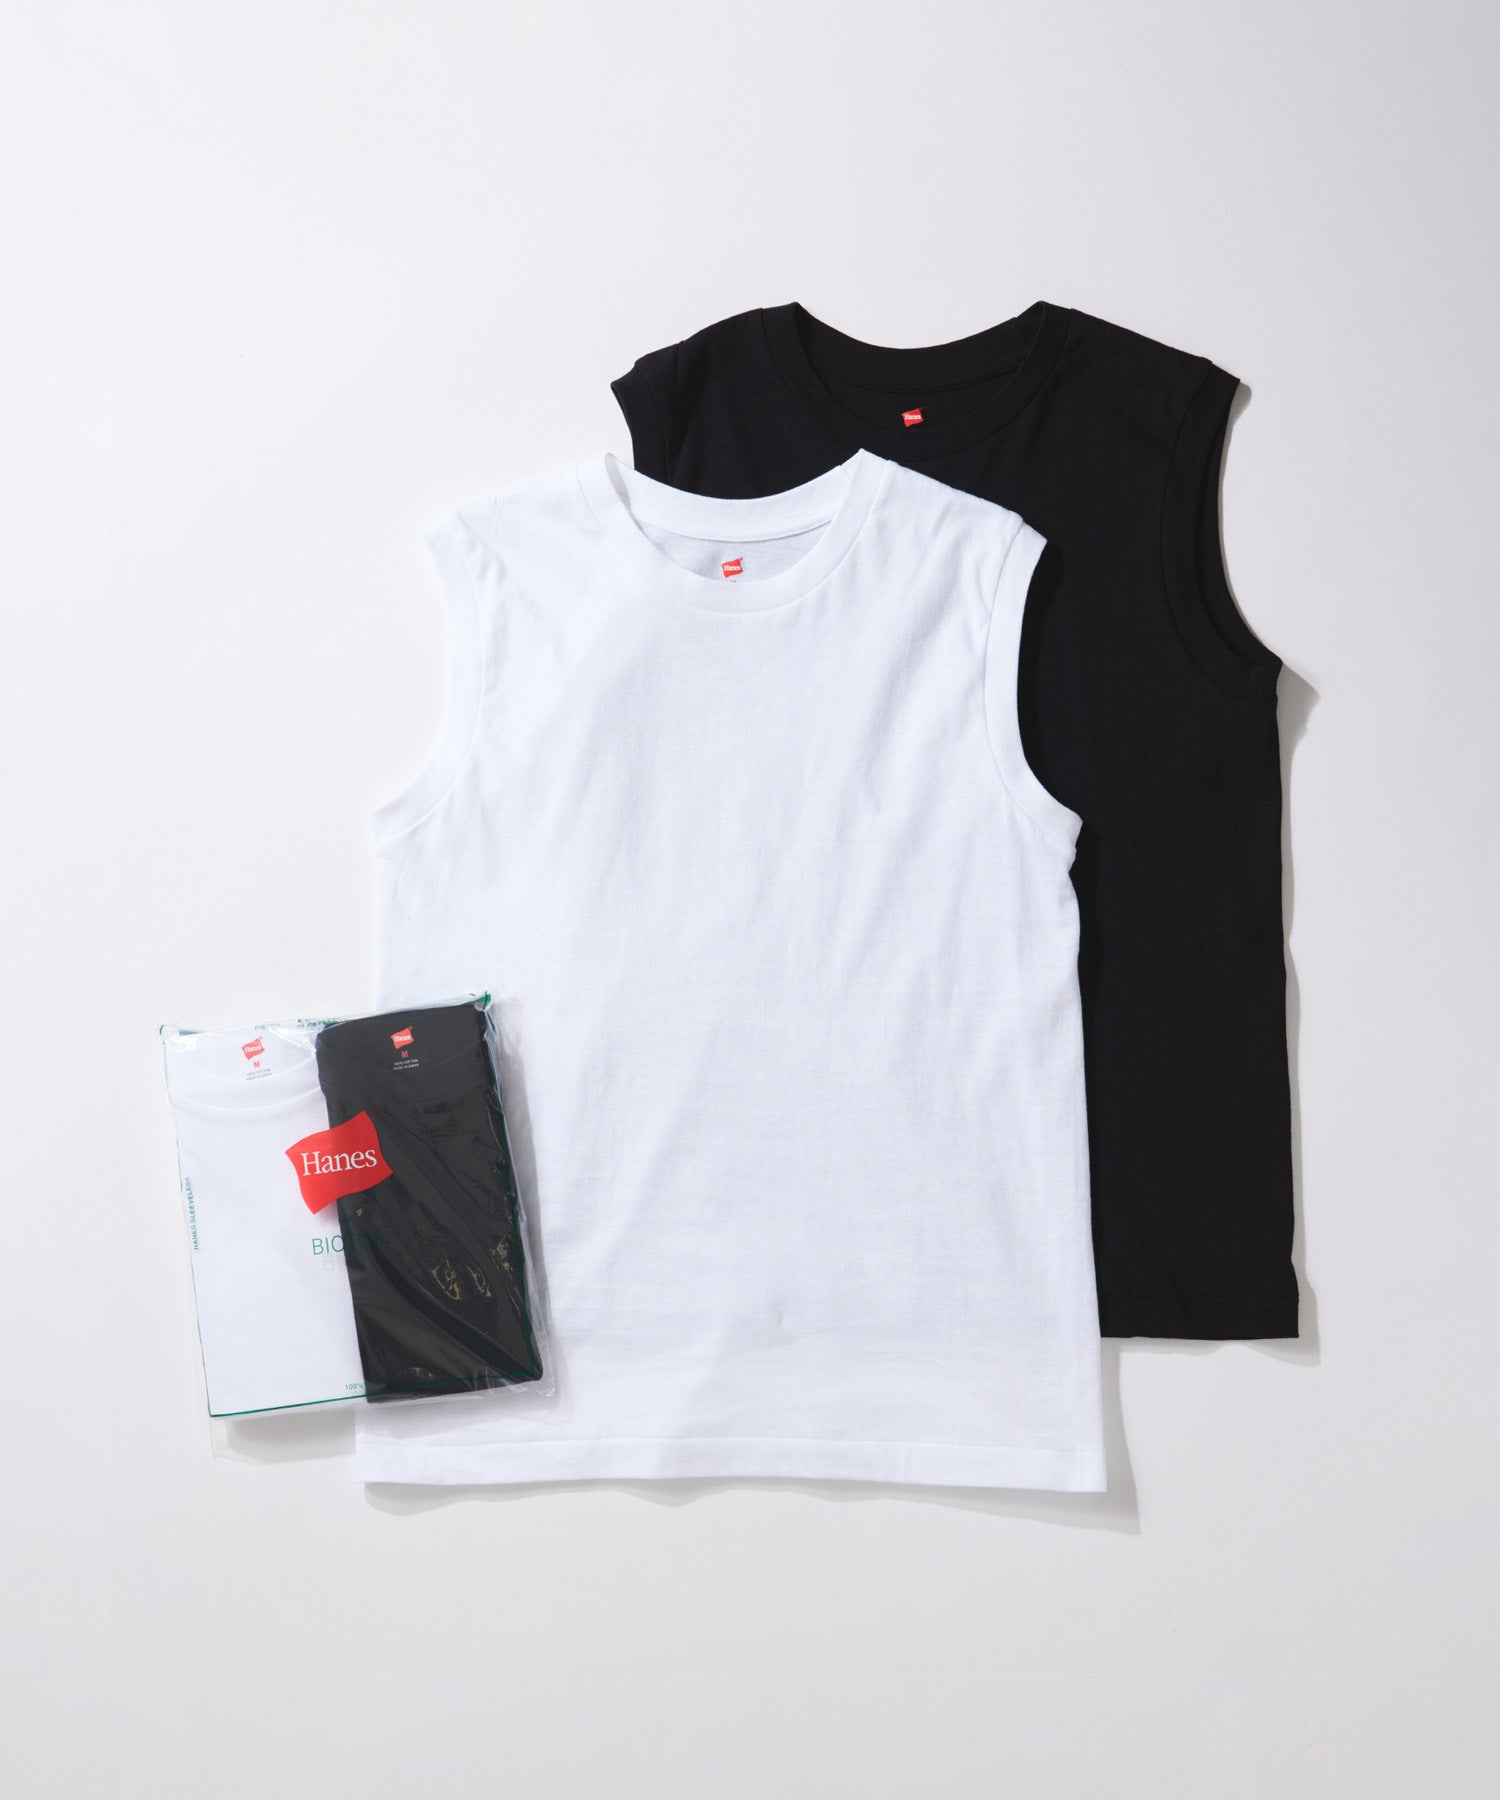 Hanes for BIOTOP】Sleeveless T-Shirts ｜ ADAM ET ROPE 